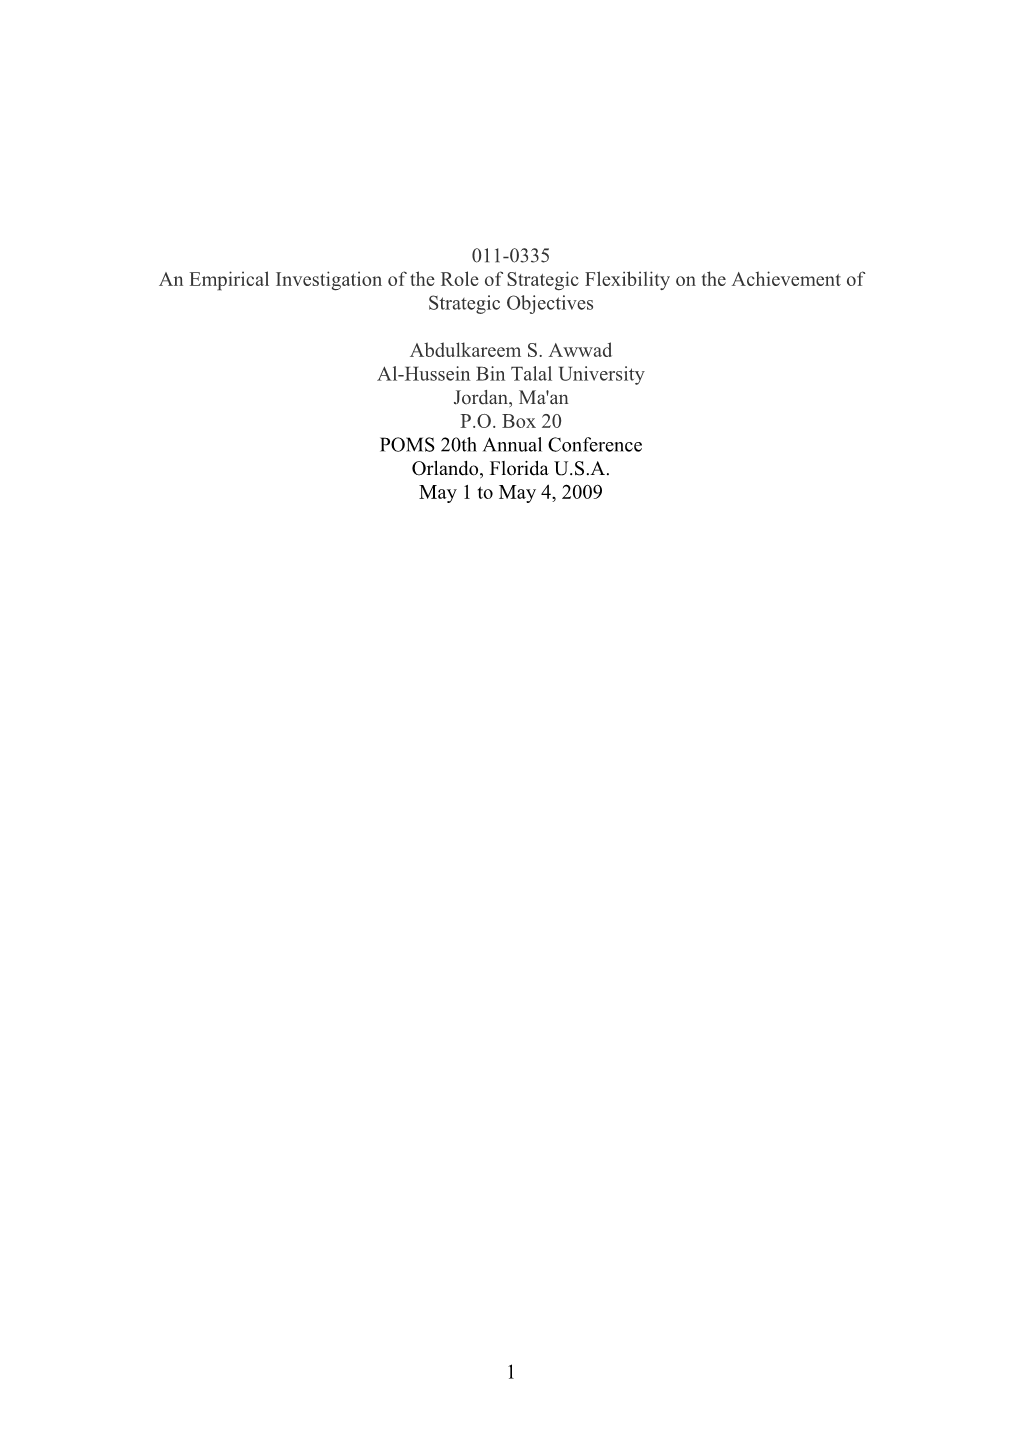 The Influence of Flexibility Dimensions on the Achievement of Strategic Objectives: An